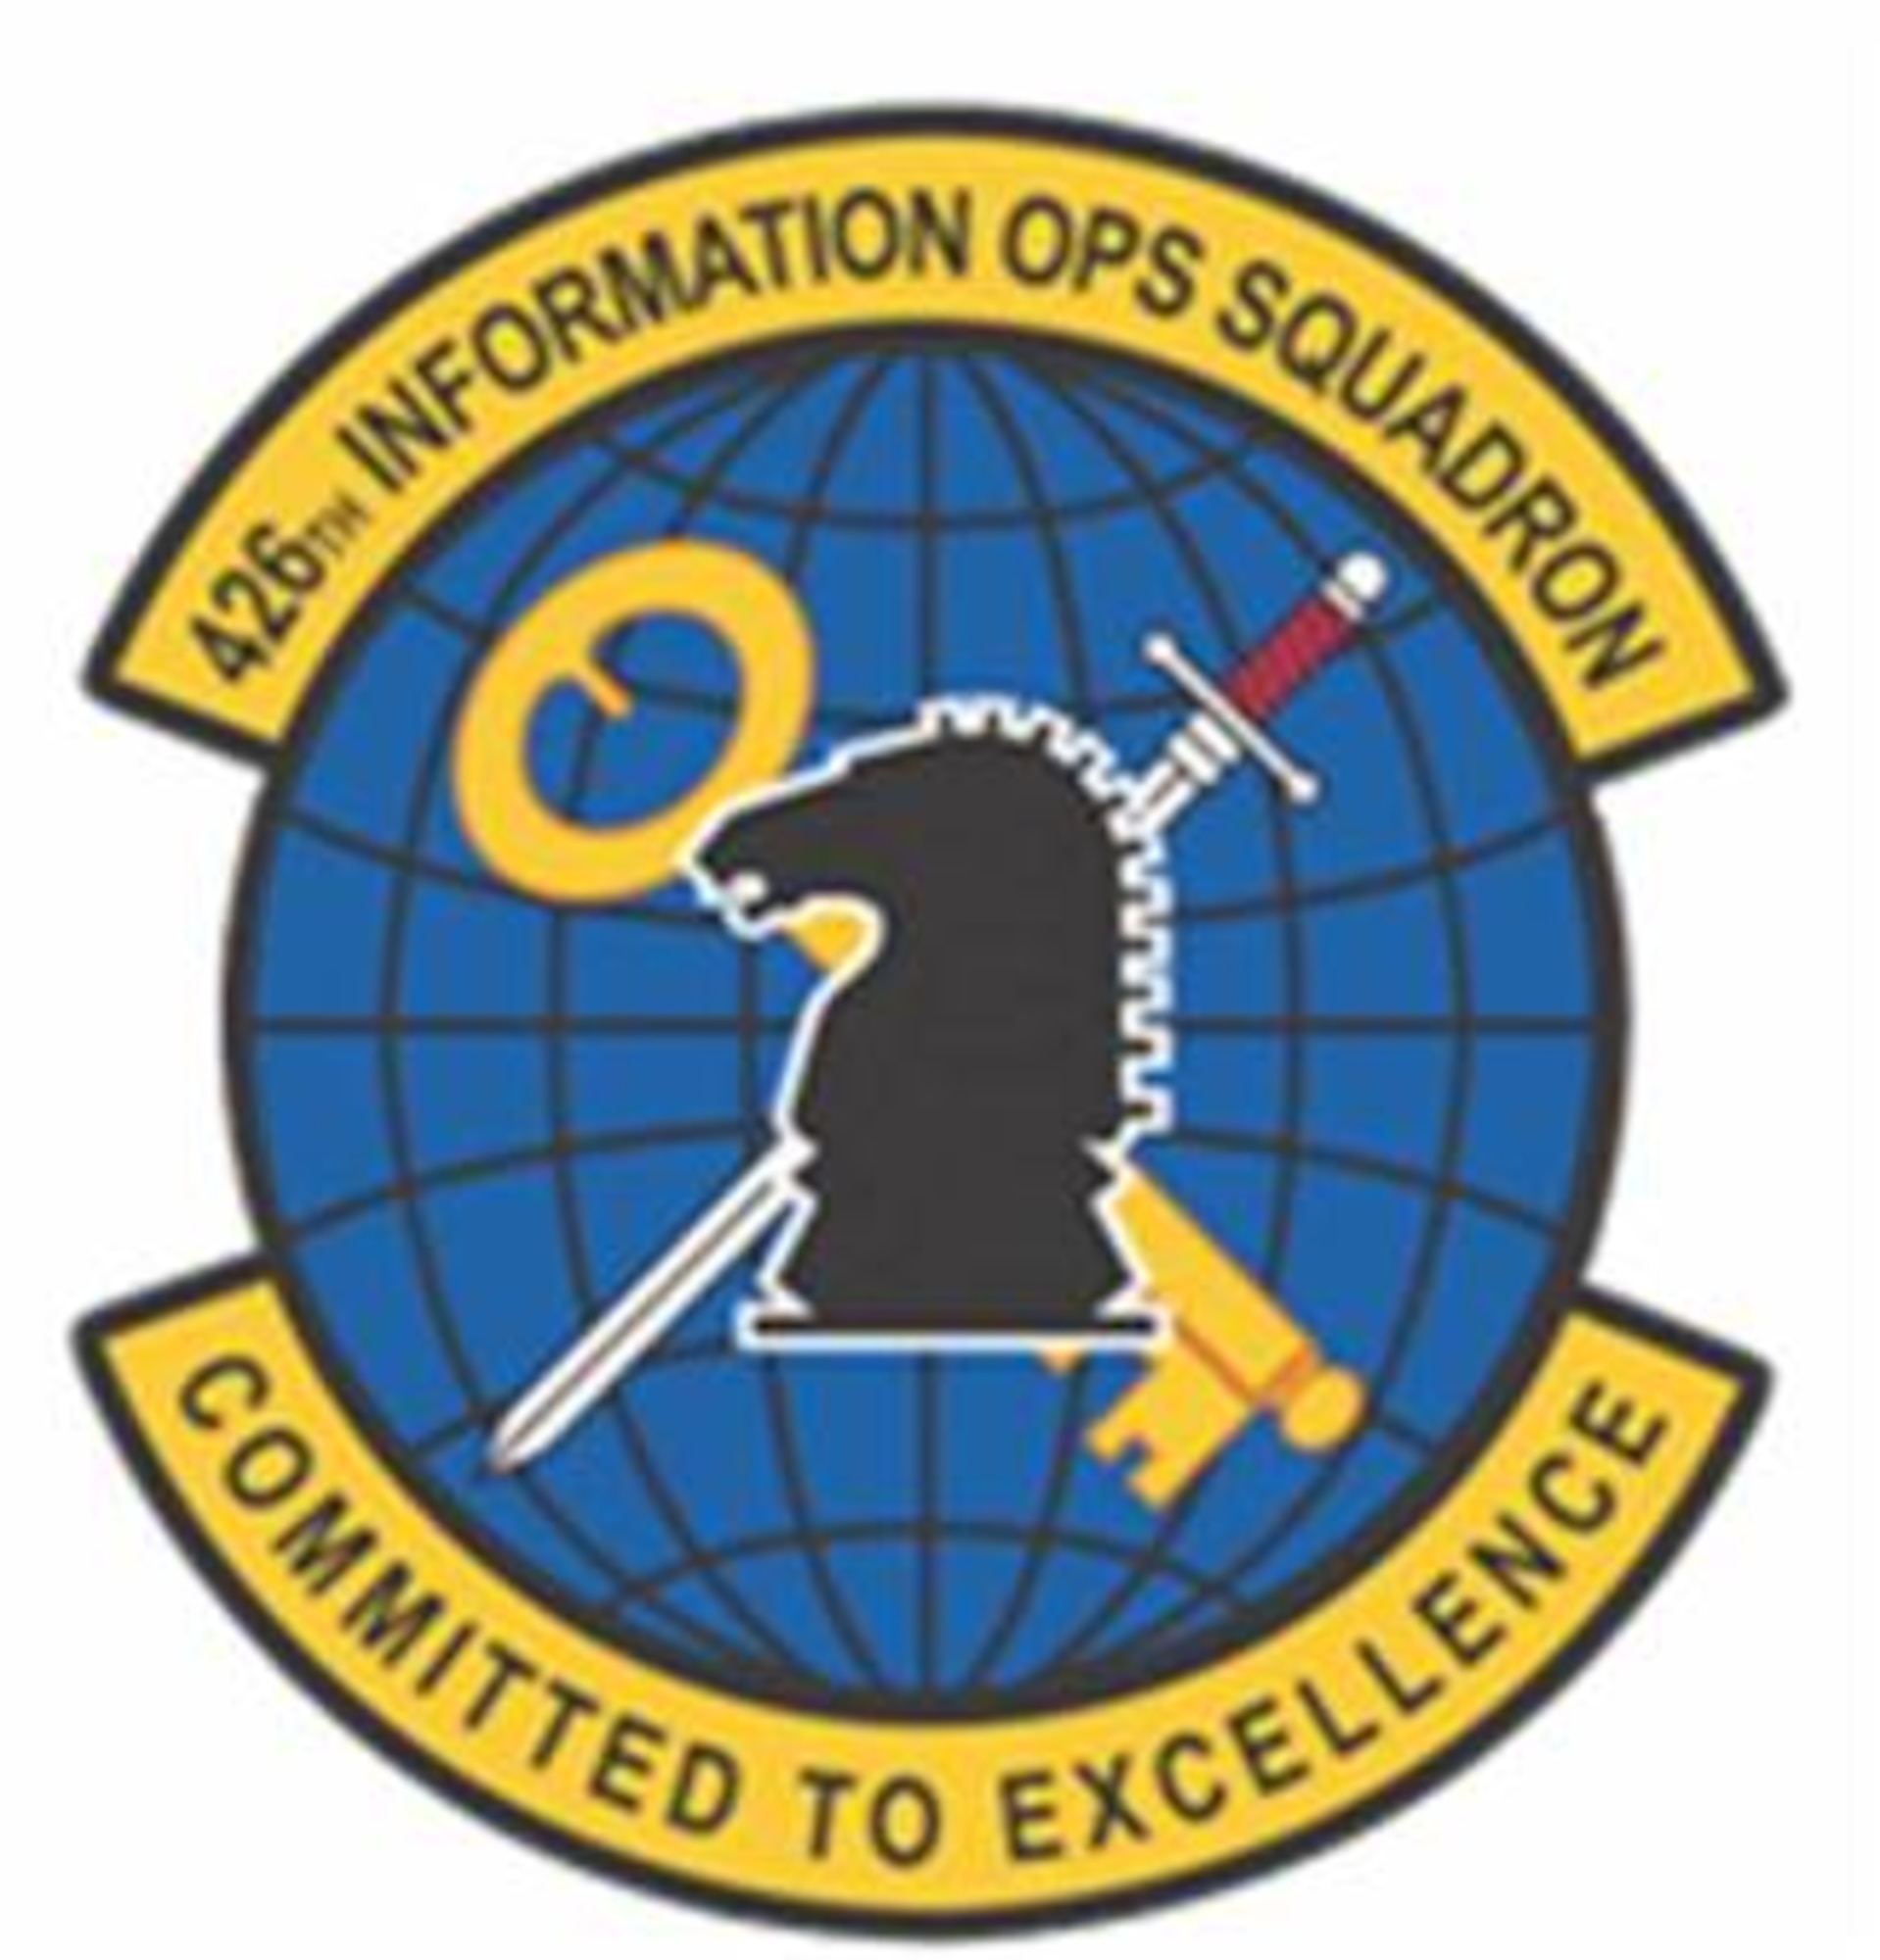 The shield of the 426th Information Operations Squadron, a unit of the 67th Network Warfare Wing at Lackland Air Force Base, Texas.